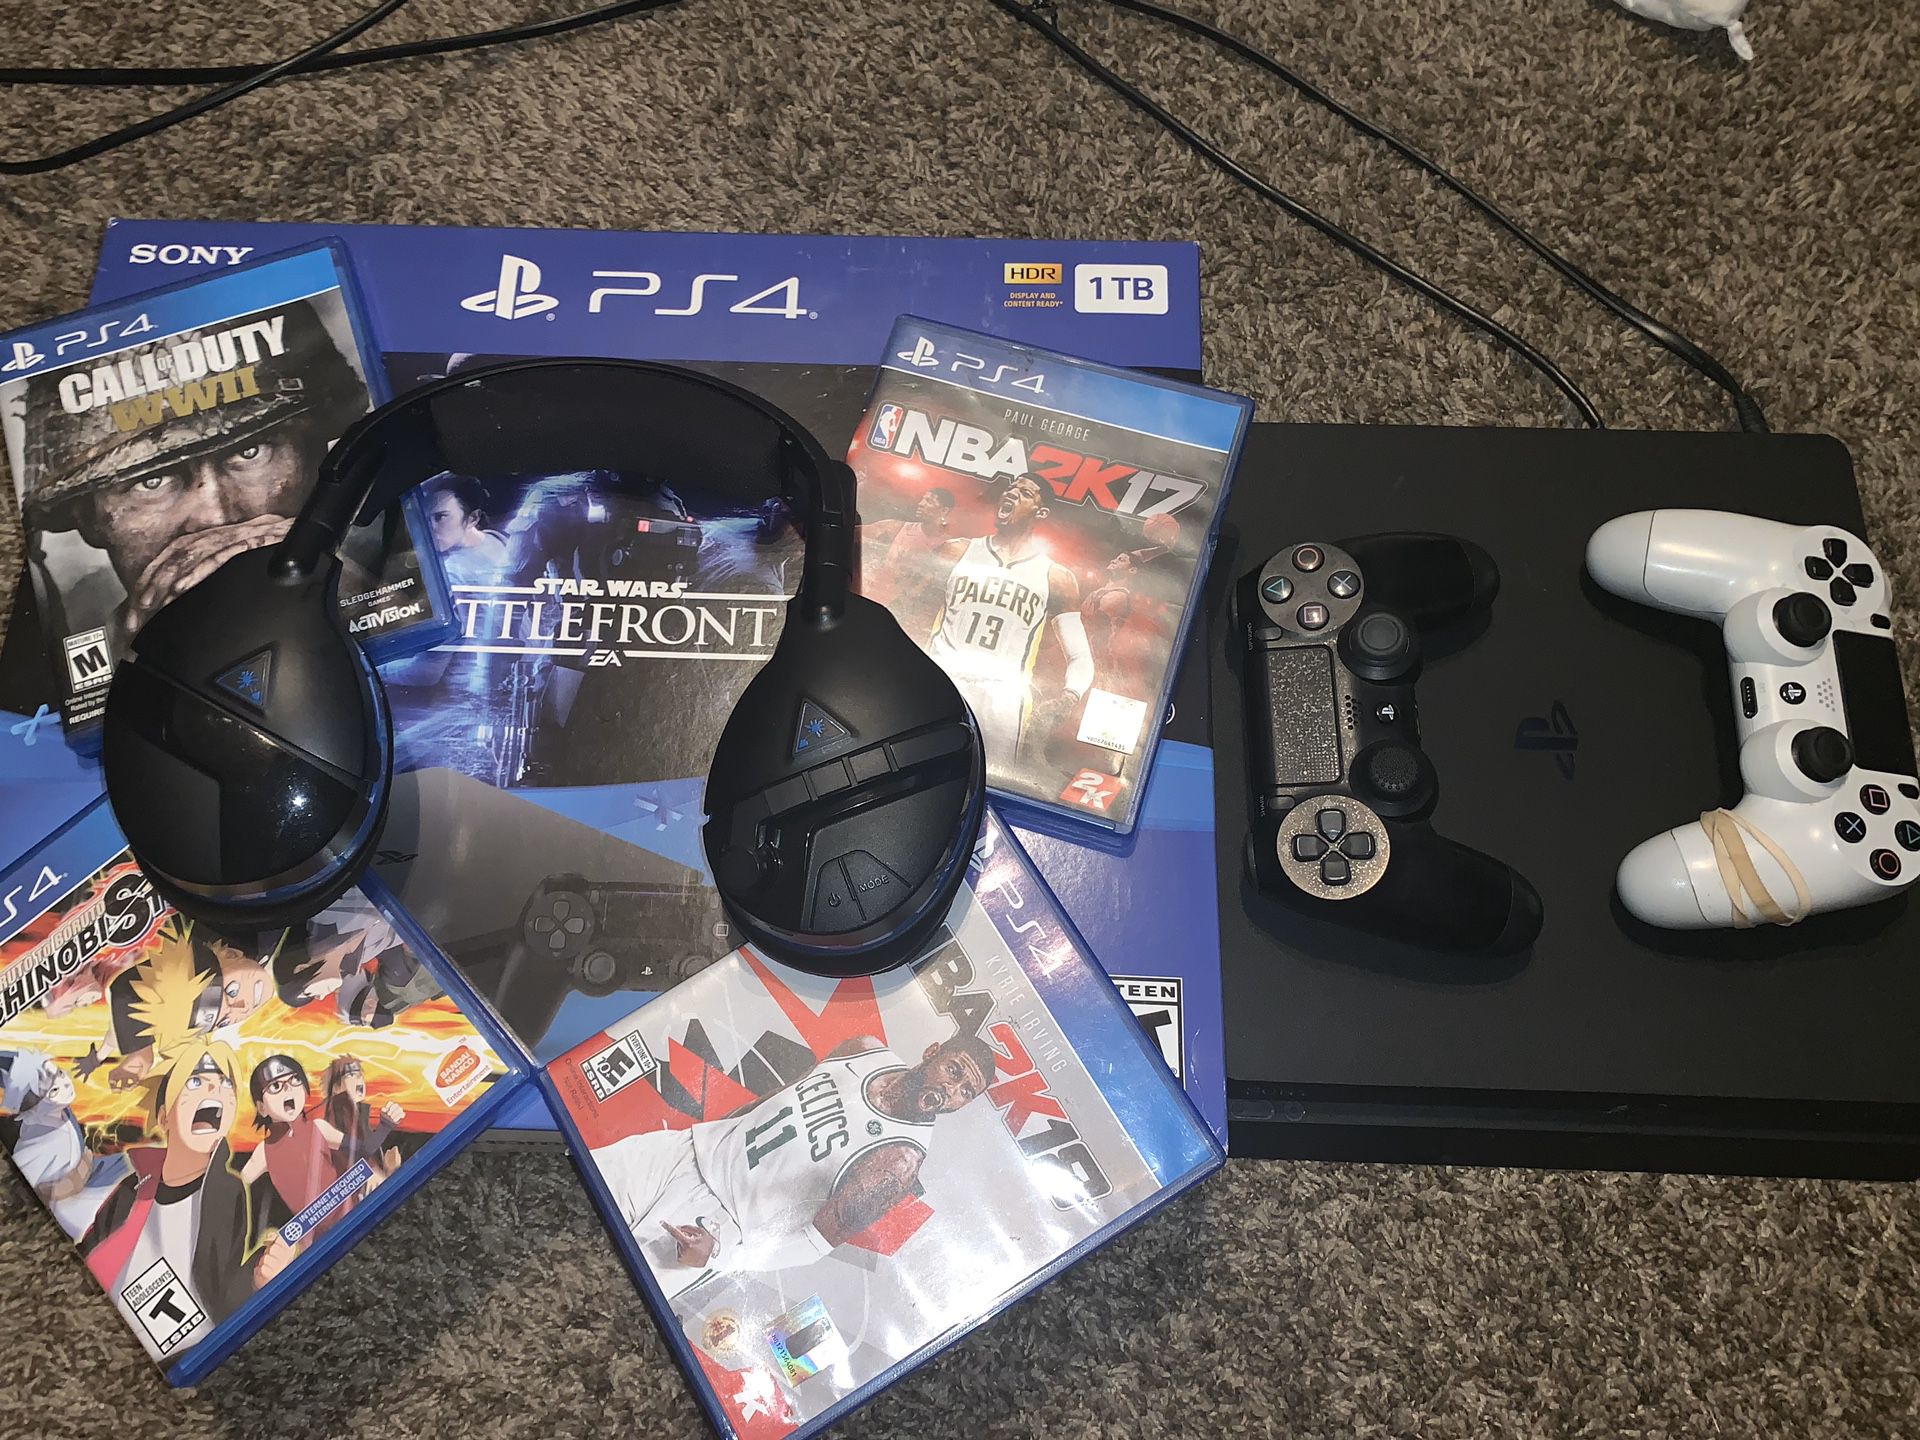 PS4 bundle system, games, controllers, mic